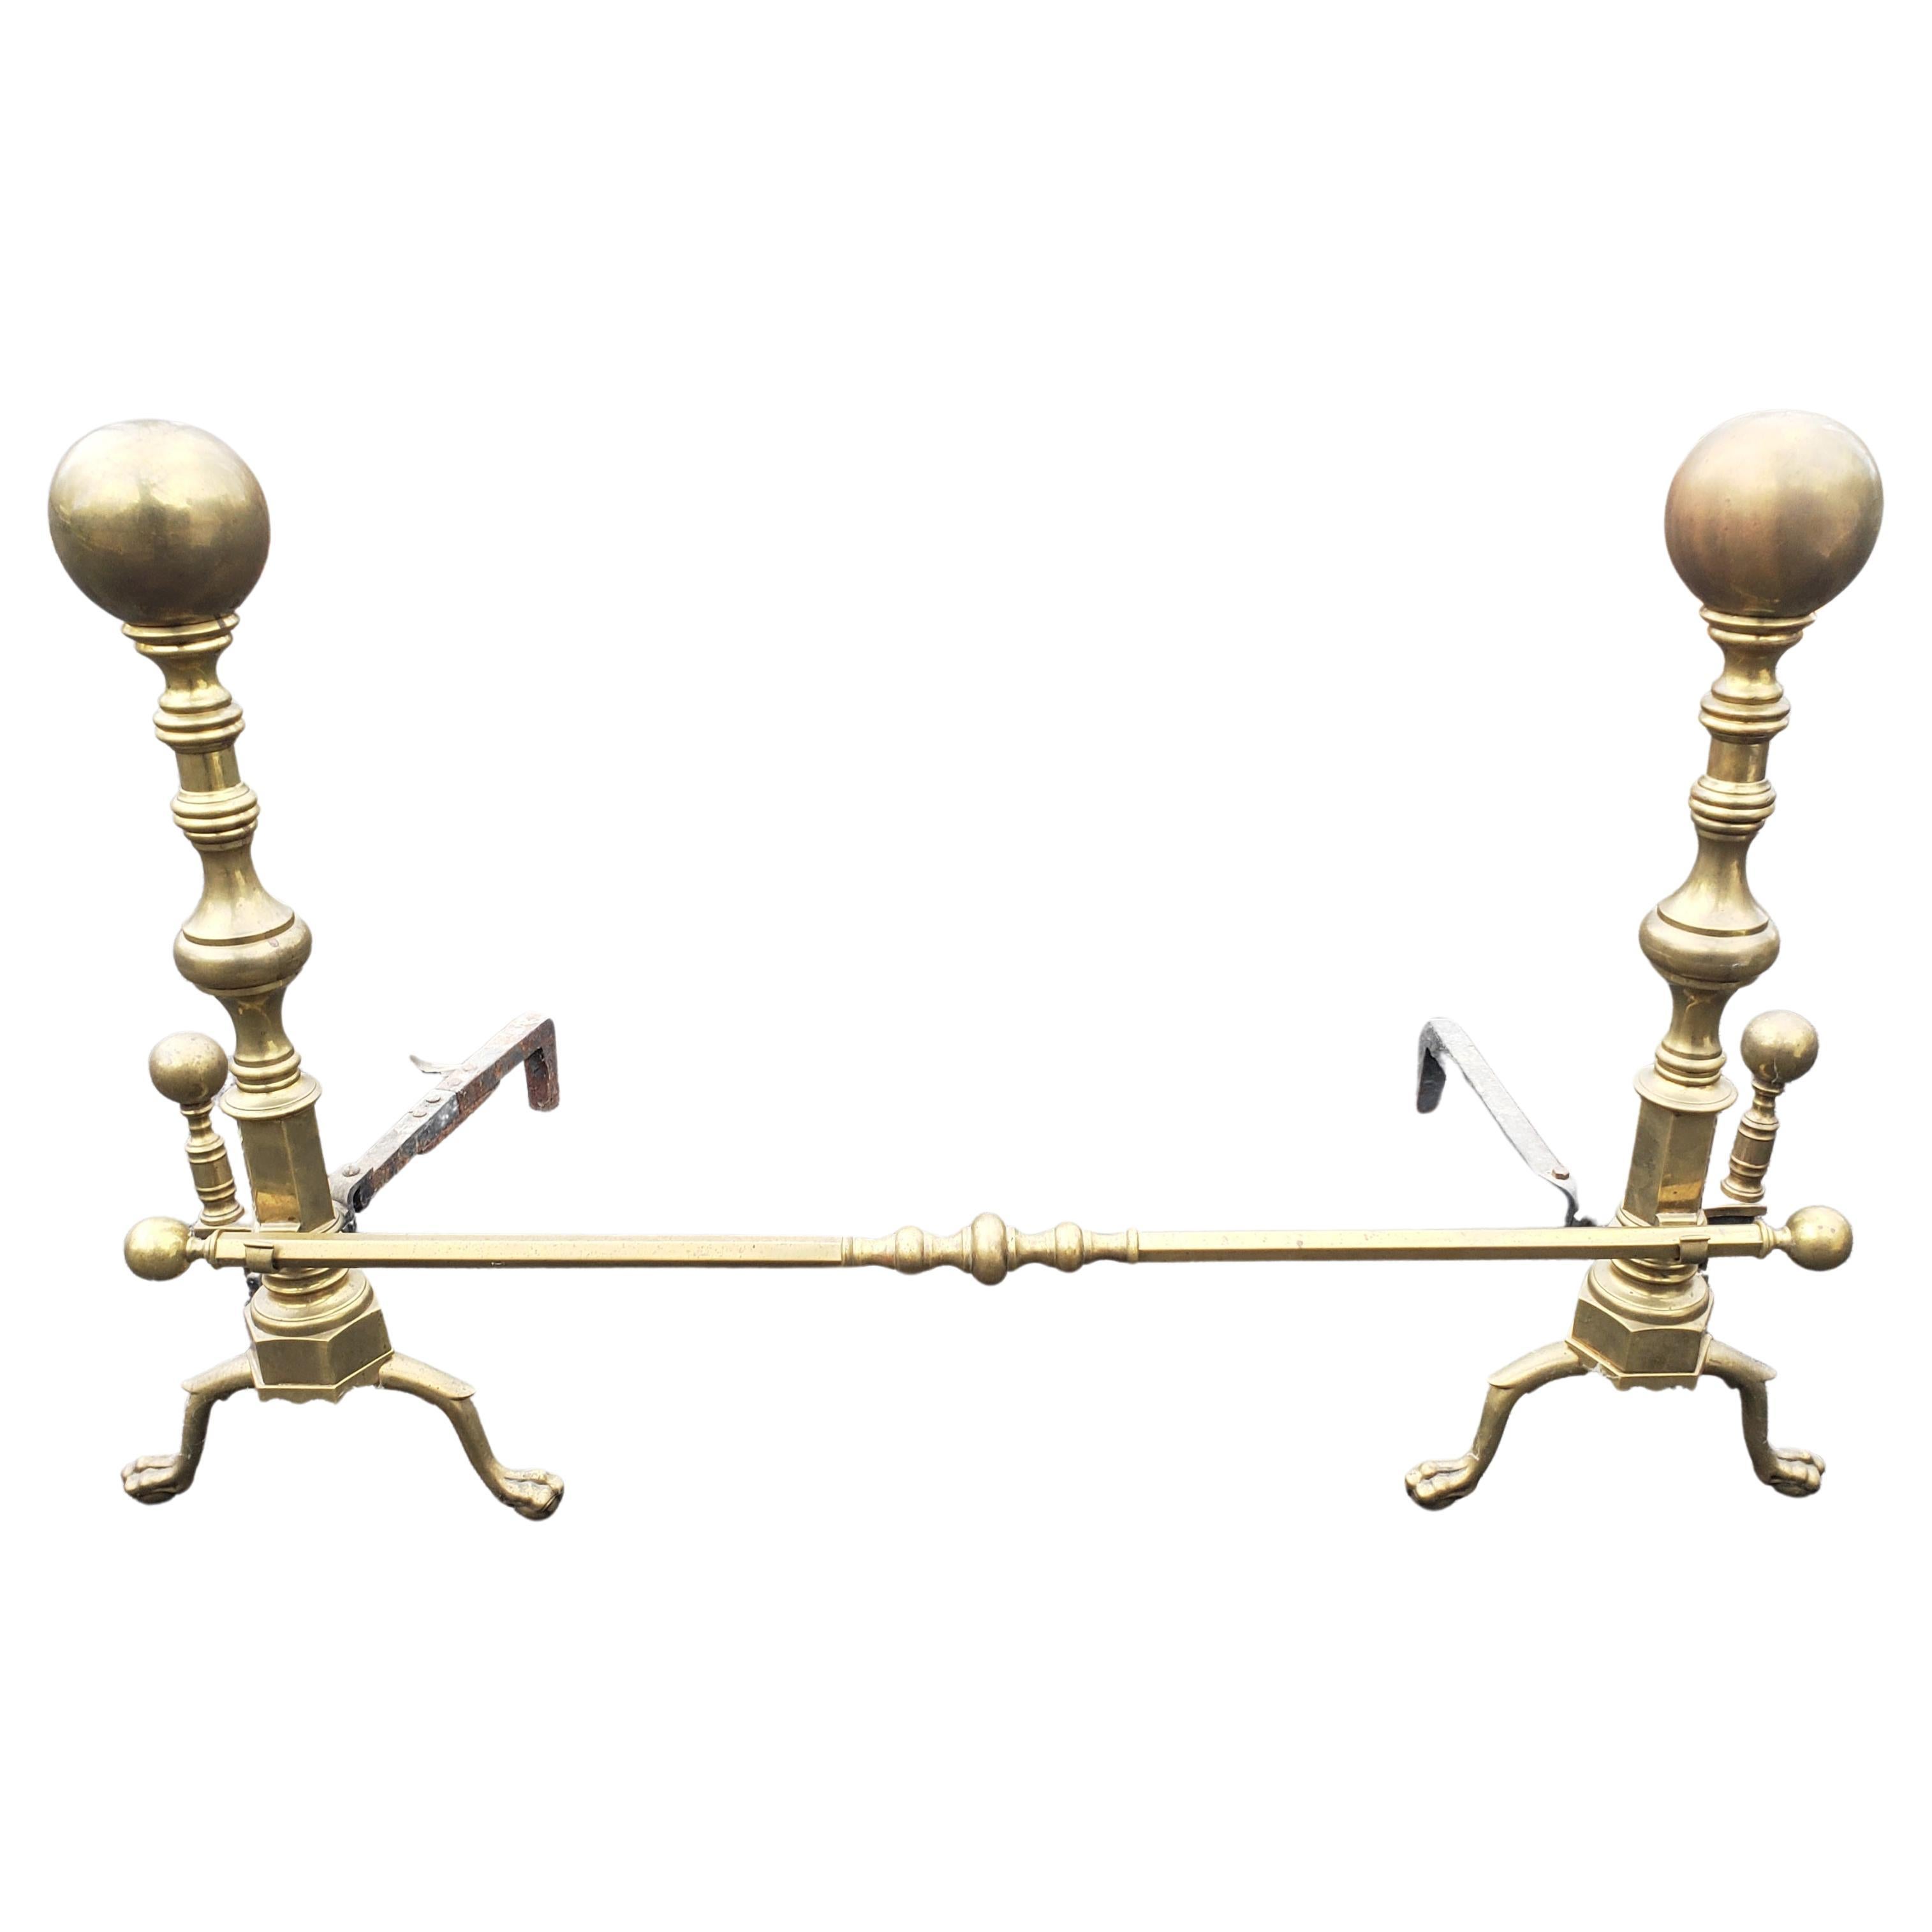 Vintage Solid Brass Andirons with Roll Bar, Circa 1920s For Sale